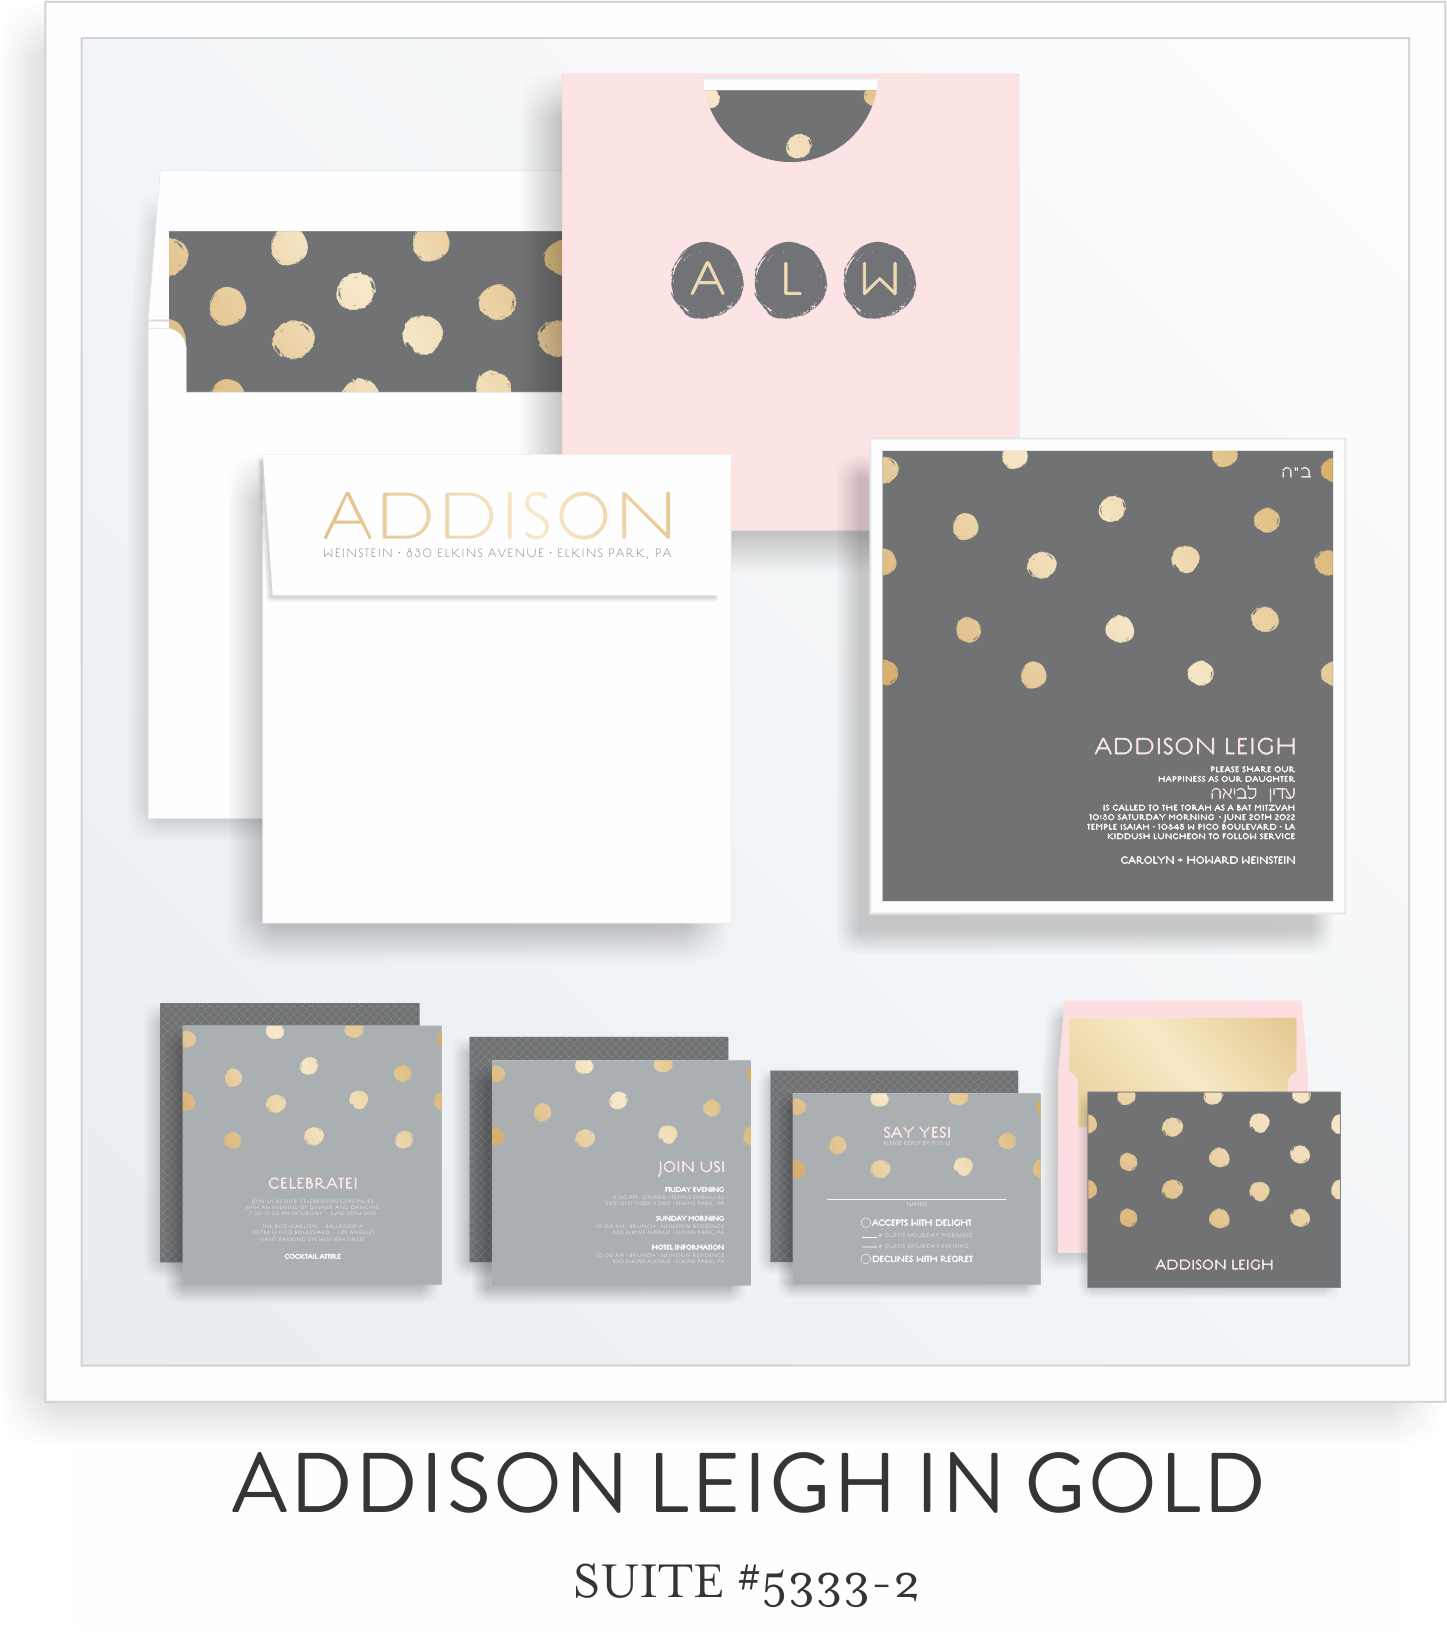 5333-2 ADDISON LEIGH IN GOLD SUITE THUMB.png